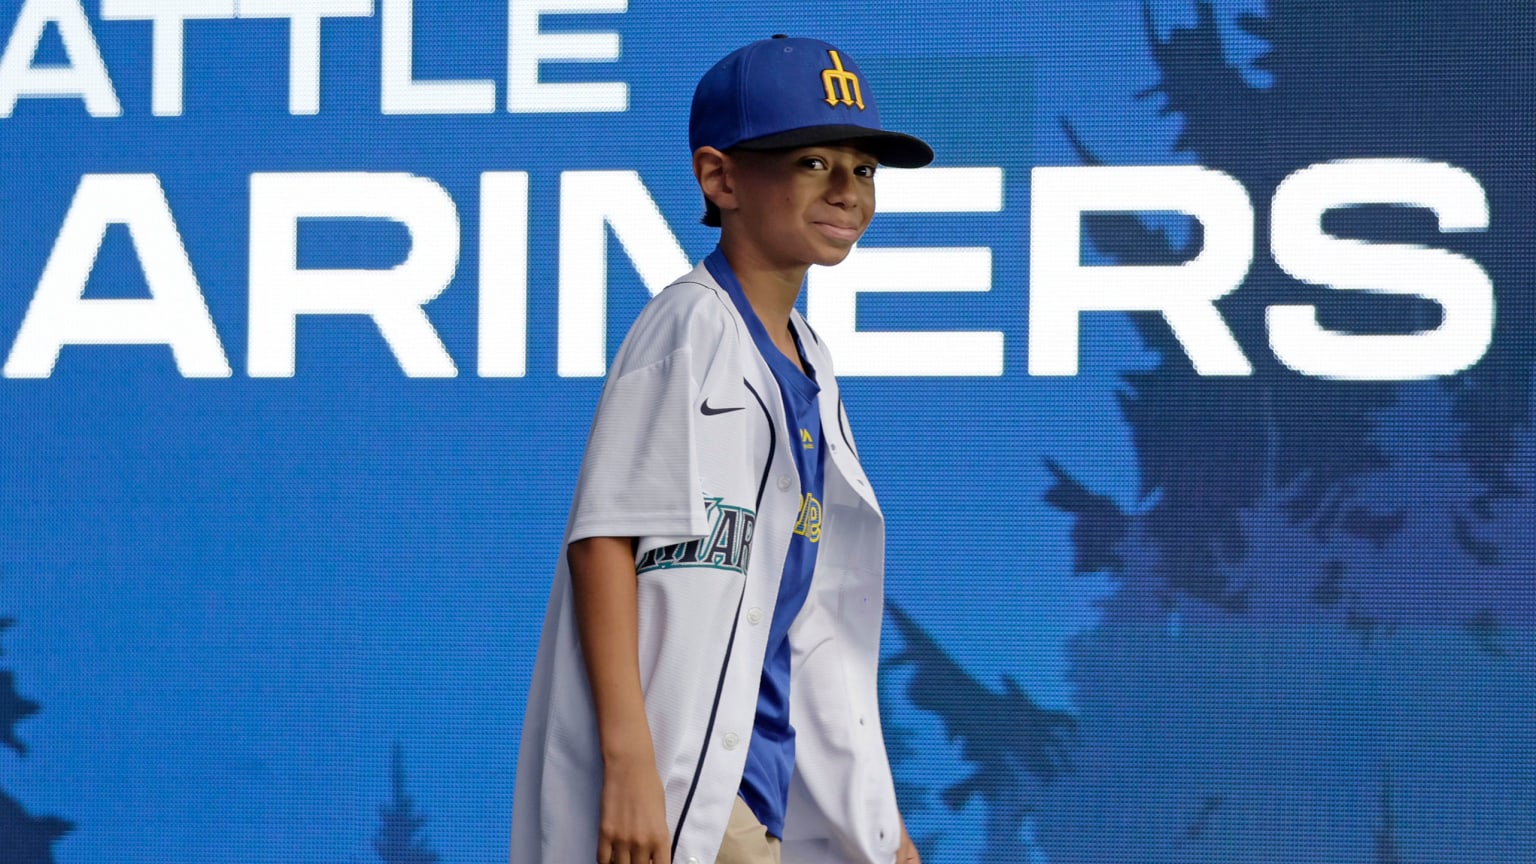 9-year-old Tiago Viernes walks onto the stage wearing a Mariners cap, jersey and T-shirt